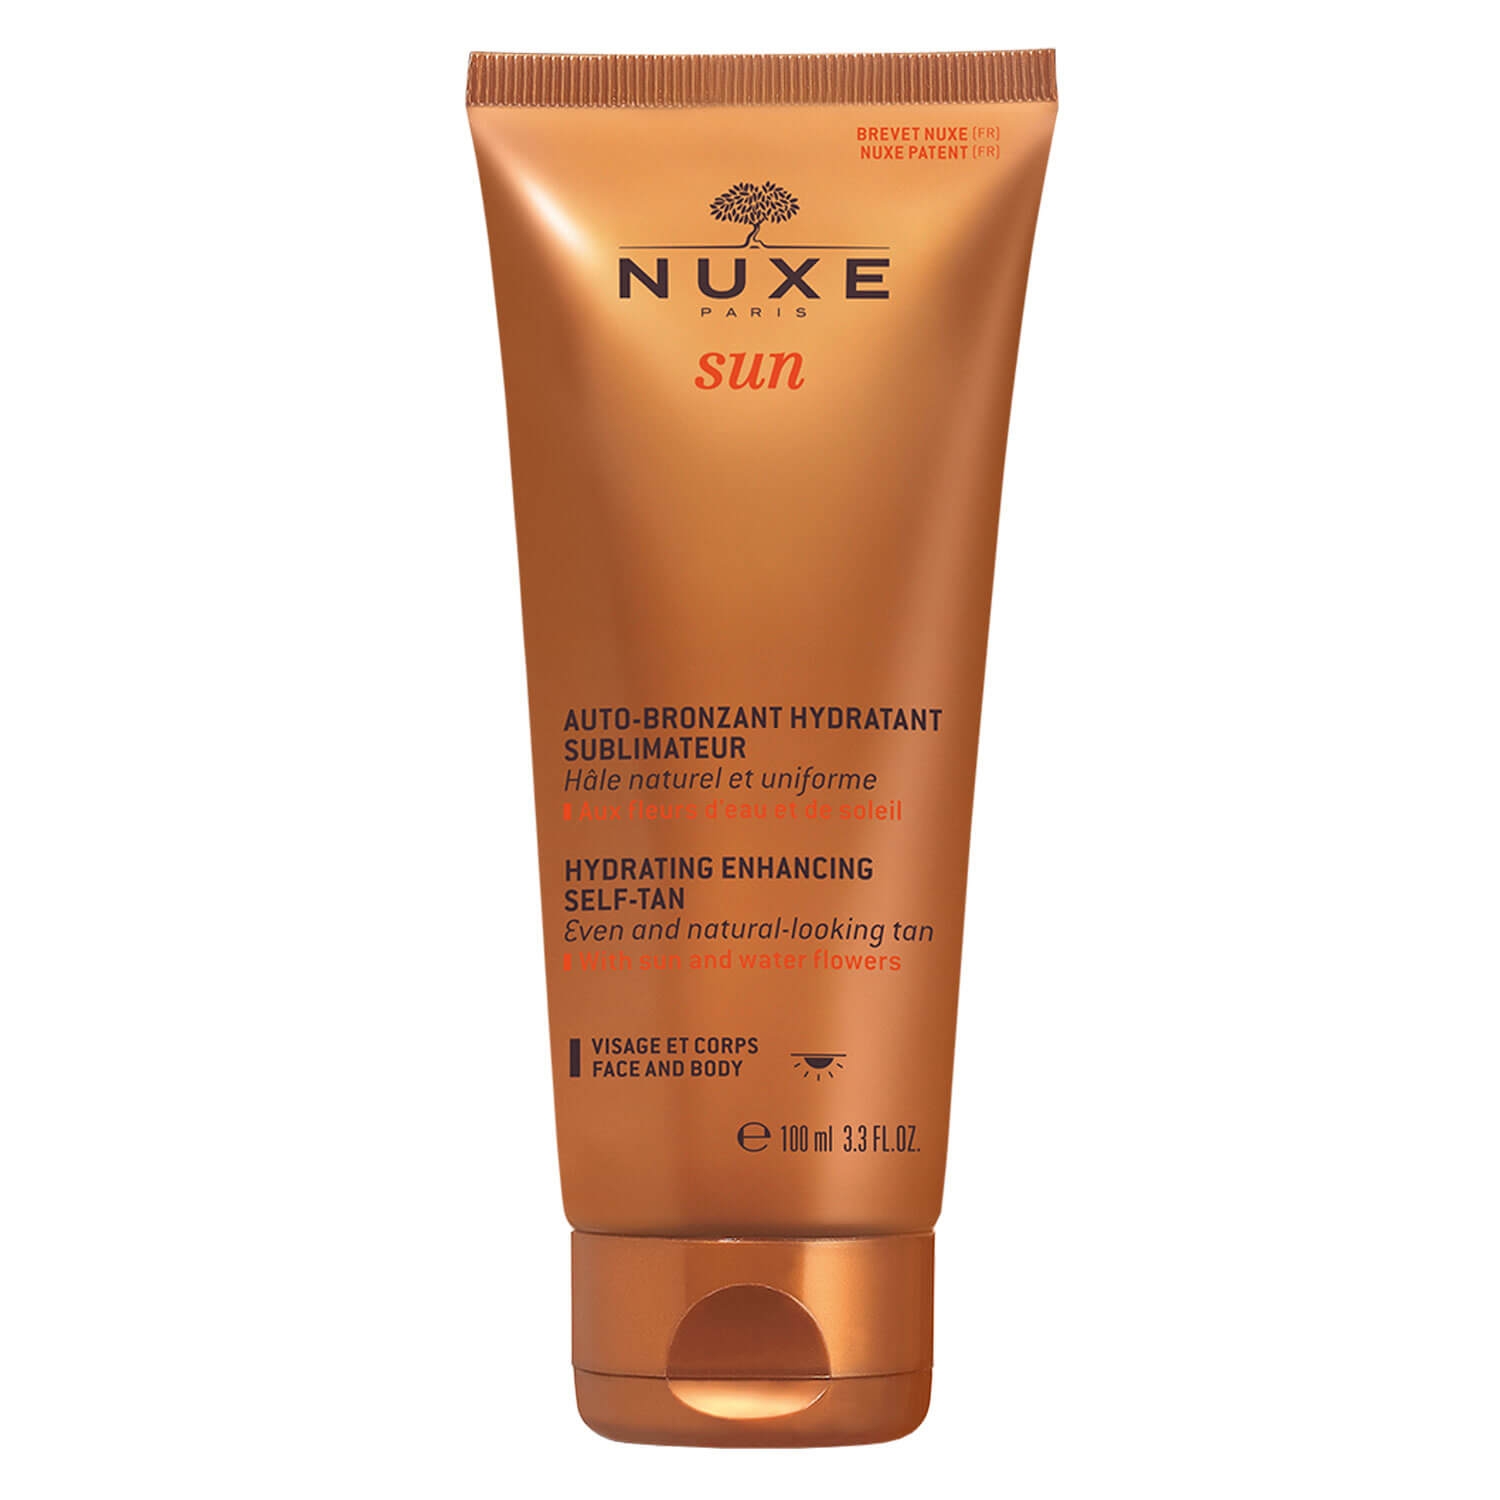 Product image from Nuxe Sun - Auto-Bronzant Hydratant